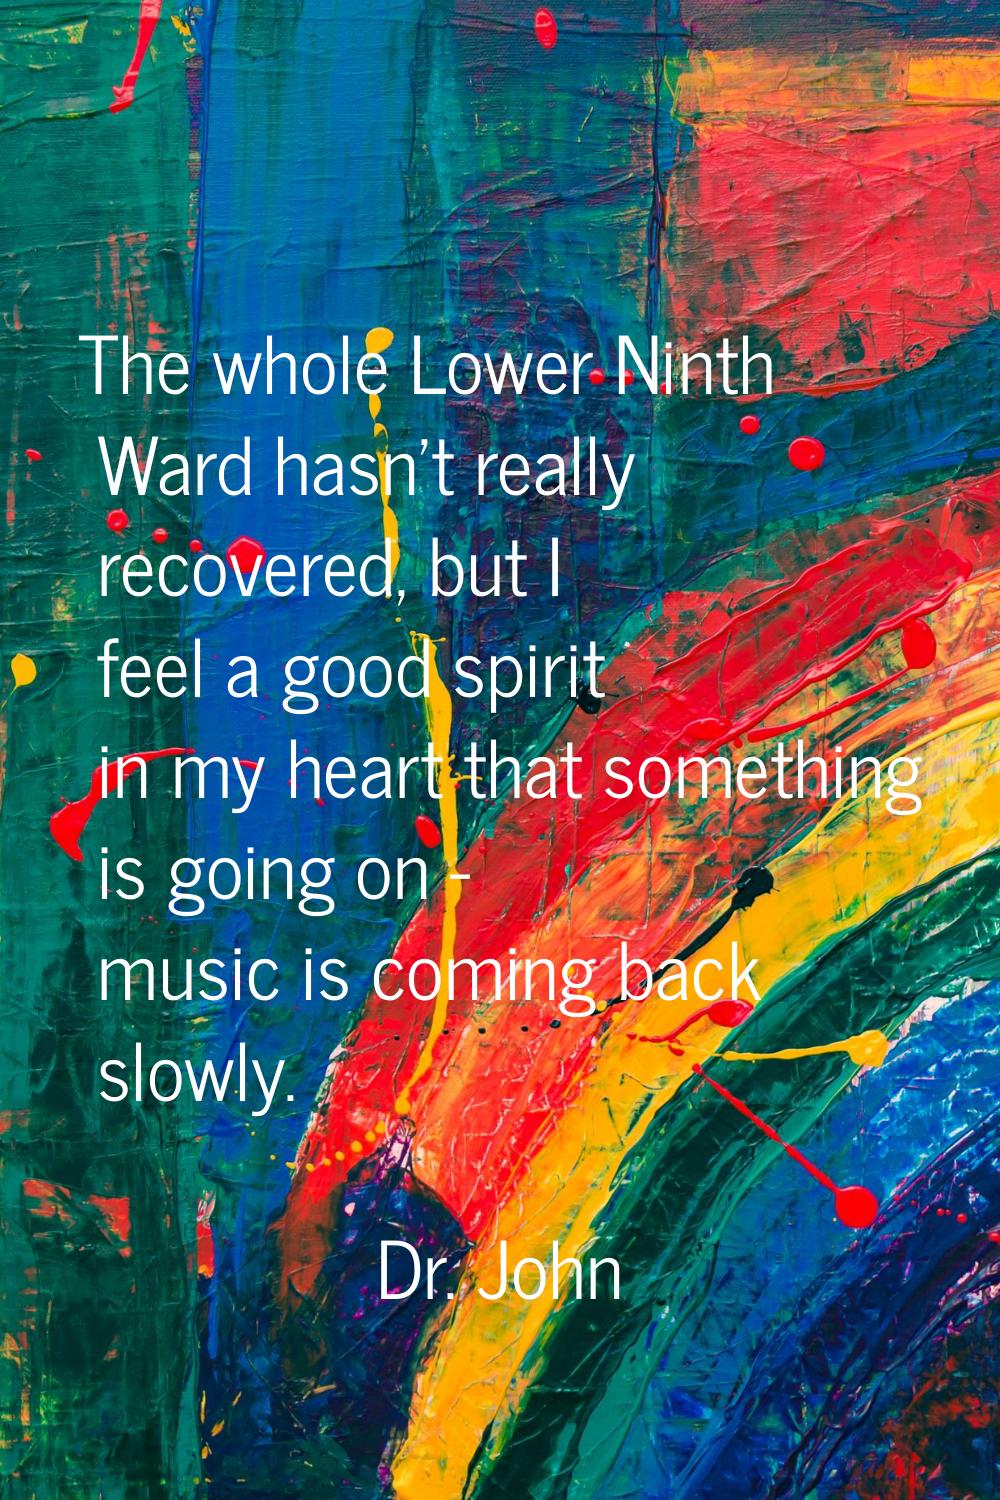 The whole Lower Ninth Ward hasn't really recovered, but I feel a good spirit in my heart that somet